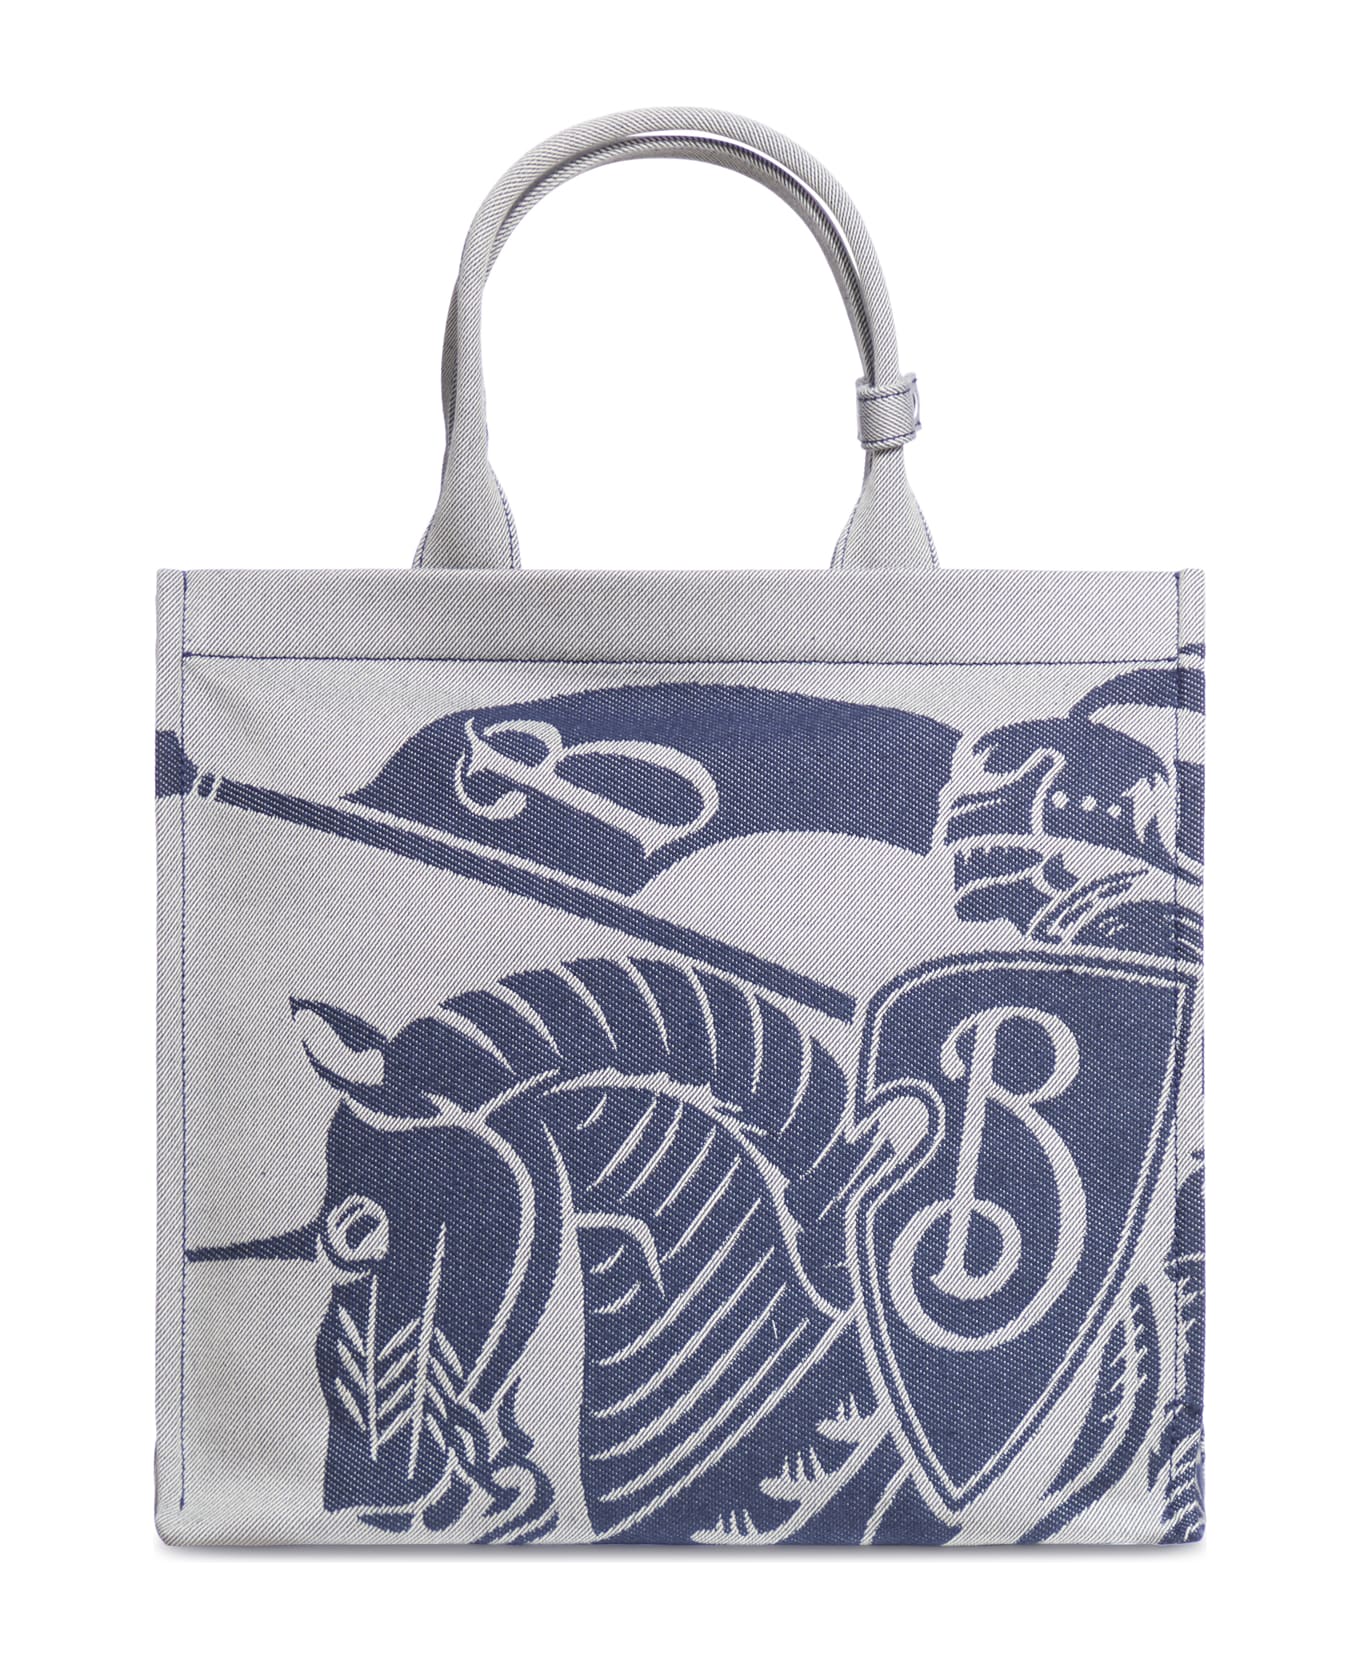 Burberry Embroidered Canvas Shopping Bag - KNIGHT トートバッグ